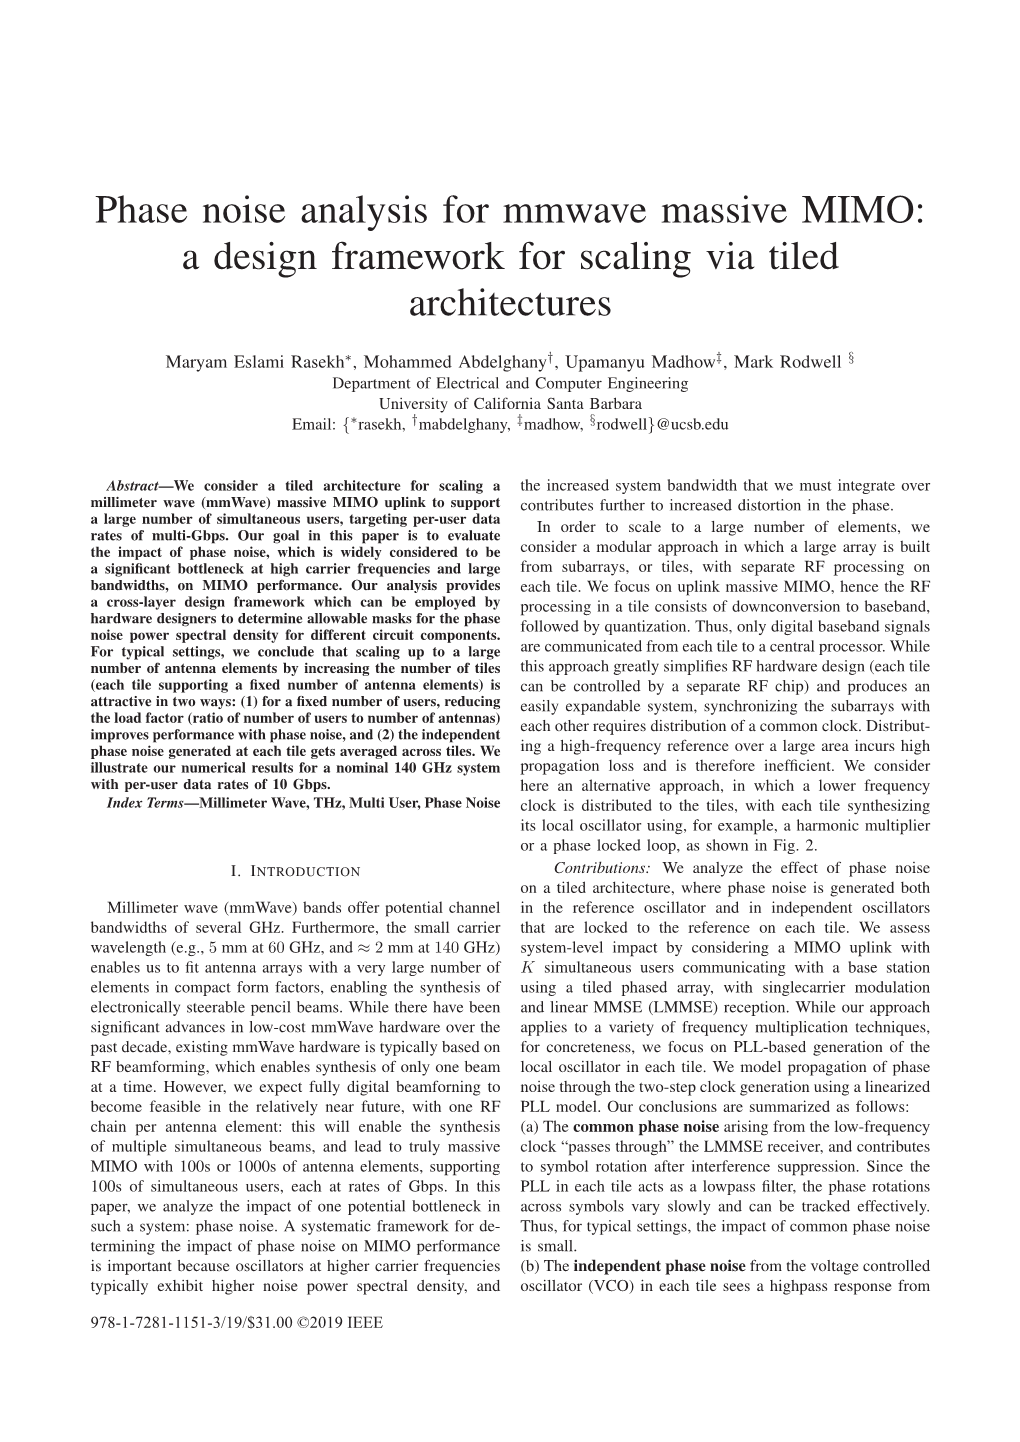 Phase Noise Analysis for Mmwave Massive MIMO: a Design Framework for Scaling Via Tiled Architectures